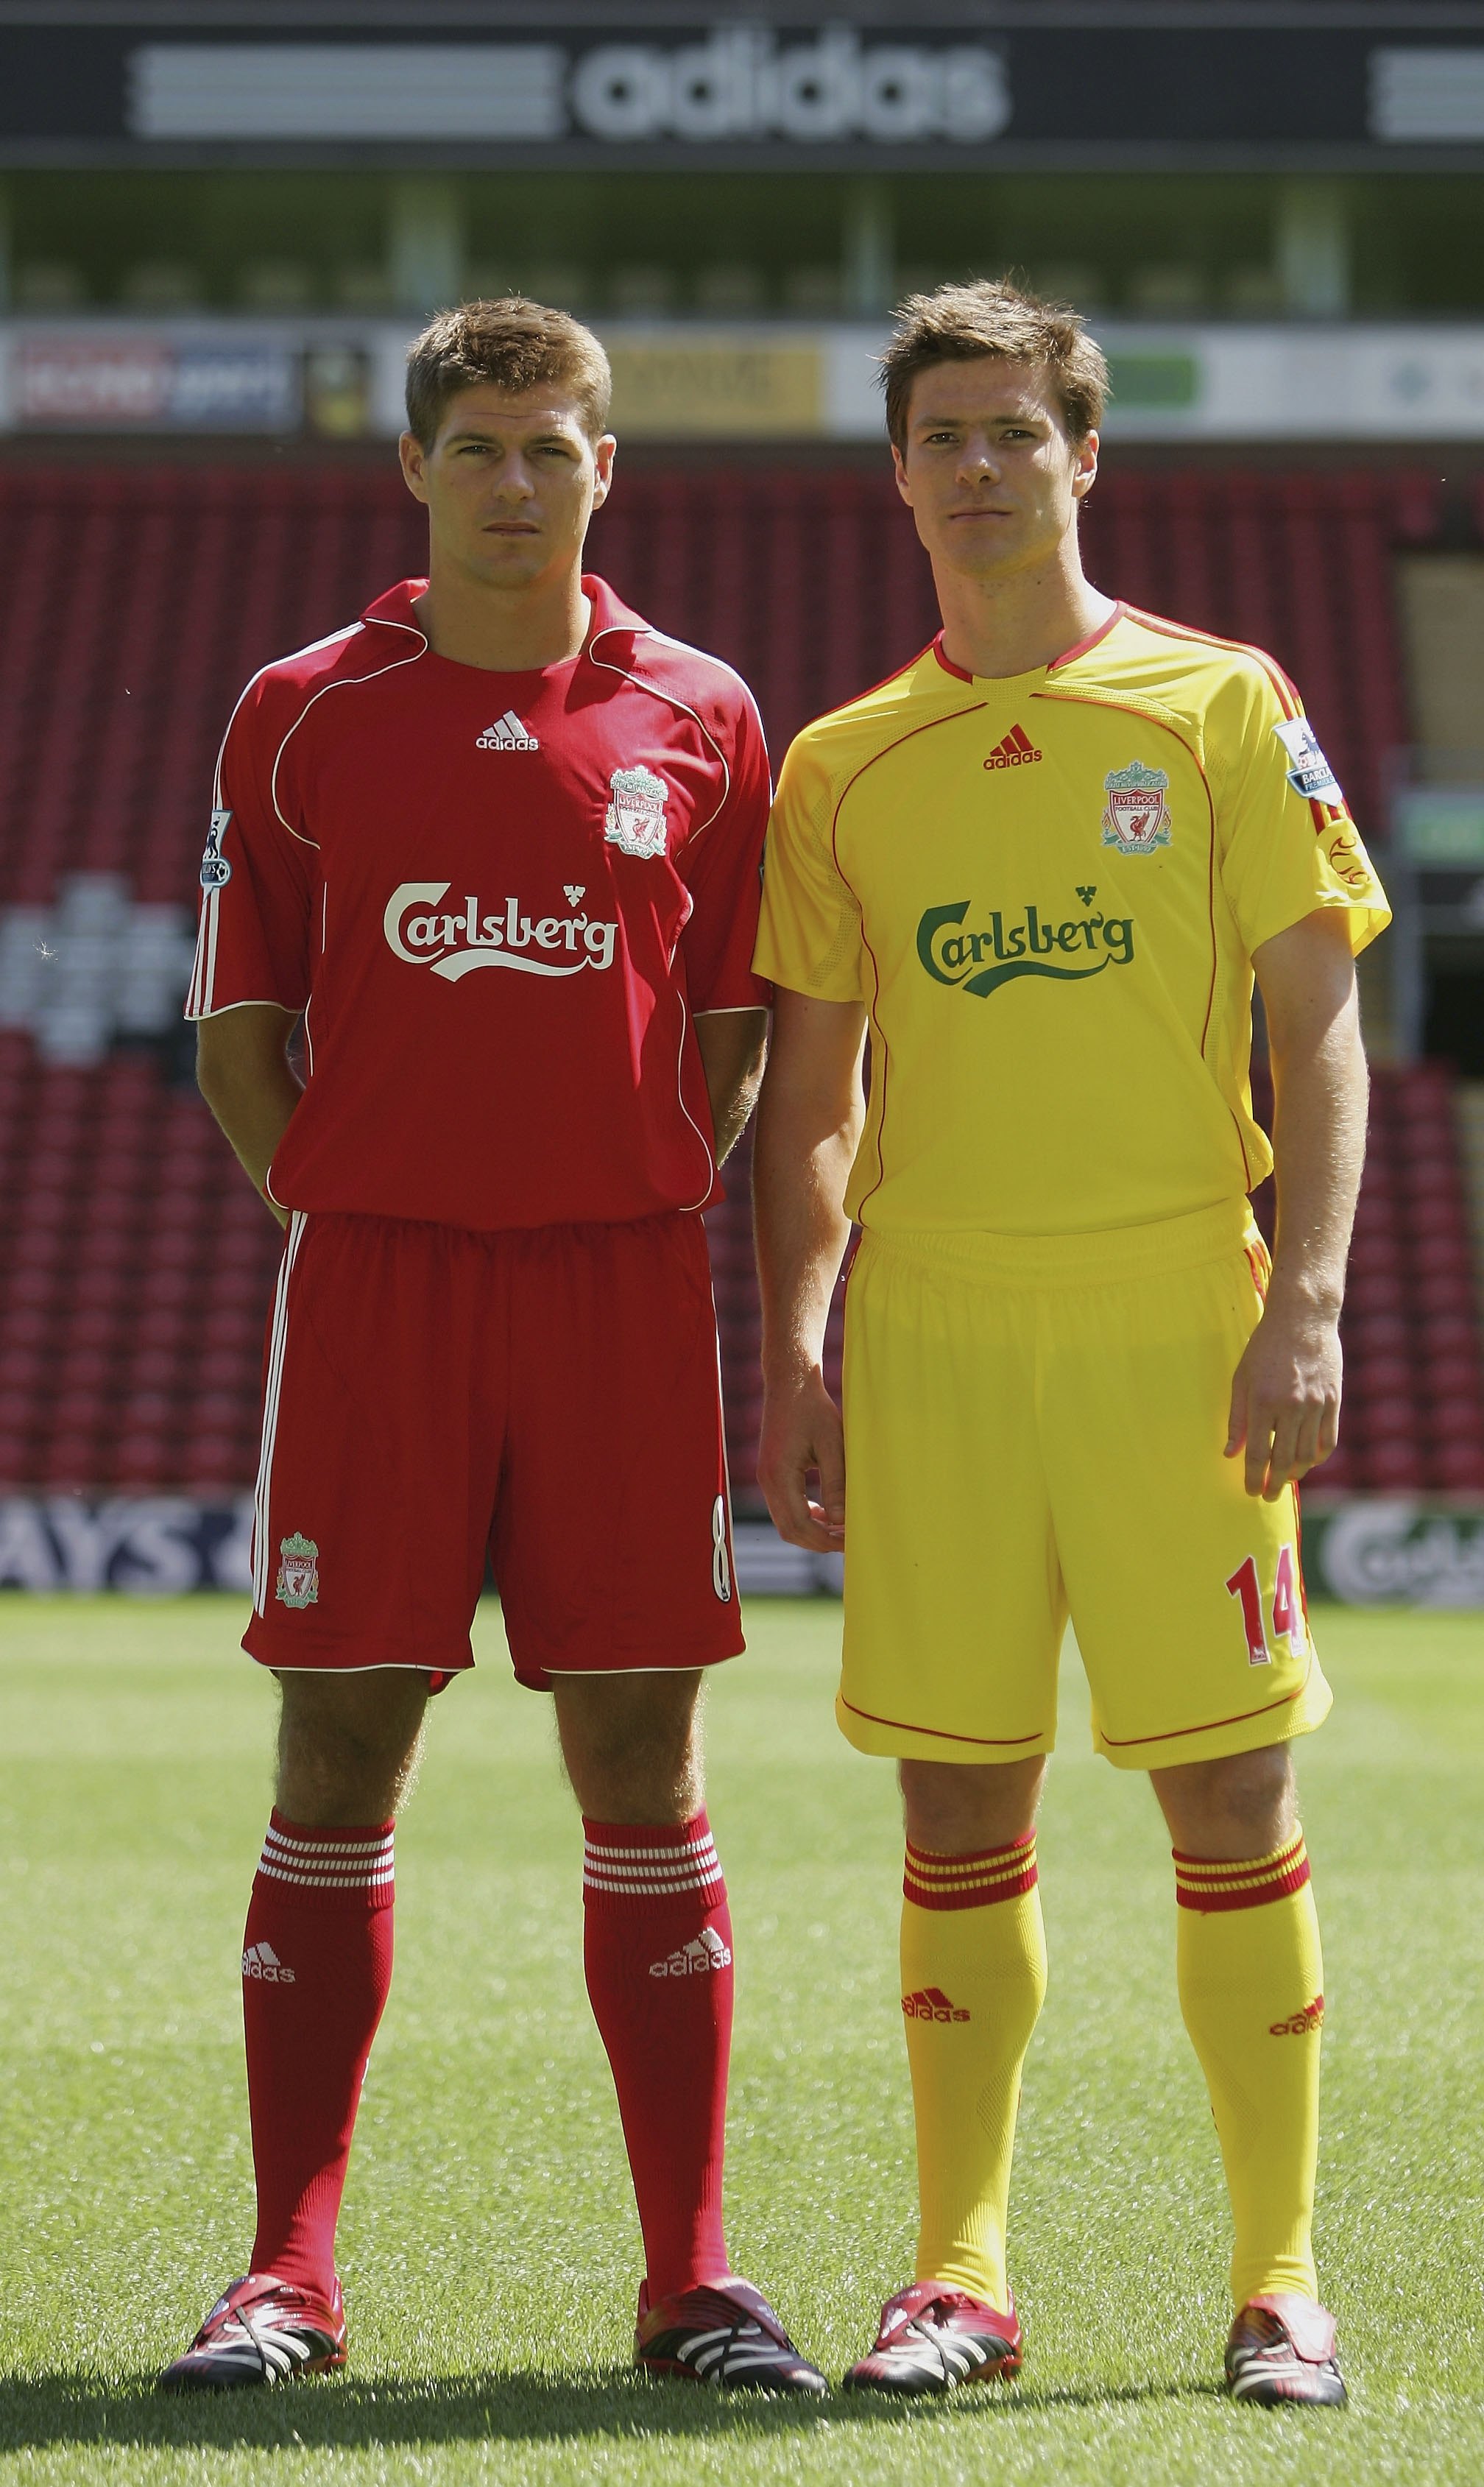 LIVERPOOL, UNITED KINGDOM - JULY 24:  Liverpool captain Steven Gerrard (L) and Xabi Alonso show off the new home and away kits during the Liverpool FC Adidas Kit Launch at Anfield on July 24, 2006 in Liverpool, England.  (Photo by Ian Walton/Getty Images